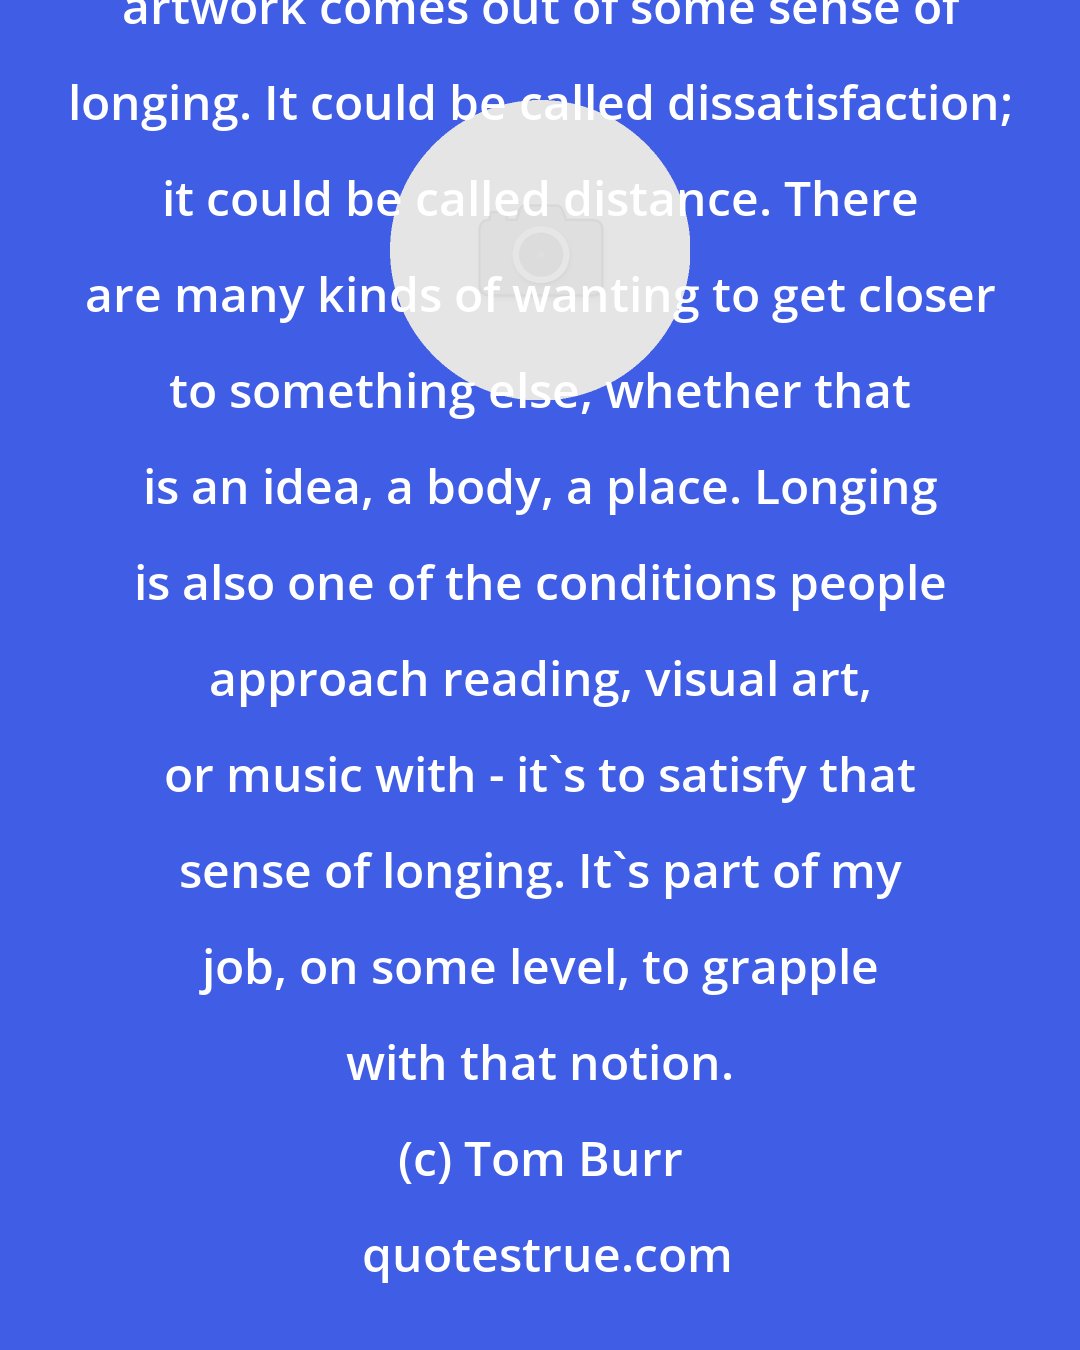 Tom Burr: Longing is the fullest sense of desire; it's the most deeply felt kind of desire. I think the most interesting artwork comes out of some sense of longing. It could be called dissatisfaction; it could be called distance. There are many kinds of wanting to get closer to something else, whether that is an idea, a body, a place. Longing is also one of the conditions people approach reading, visual art, or music with - it's to satisfy that sense of longing. It's part of my job, on some level, to grapple with that notion.